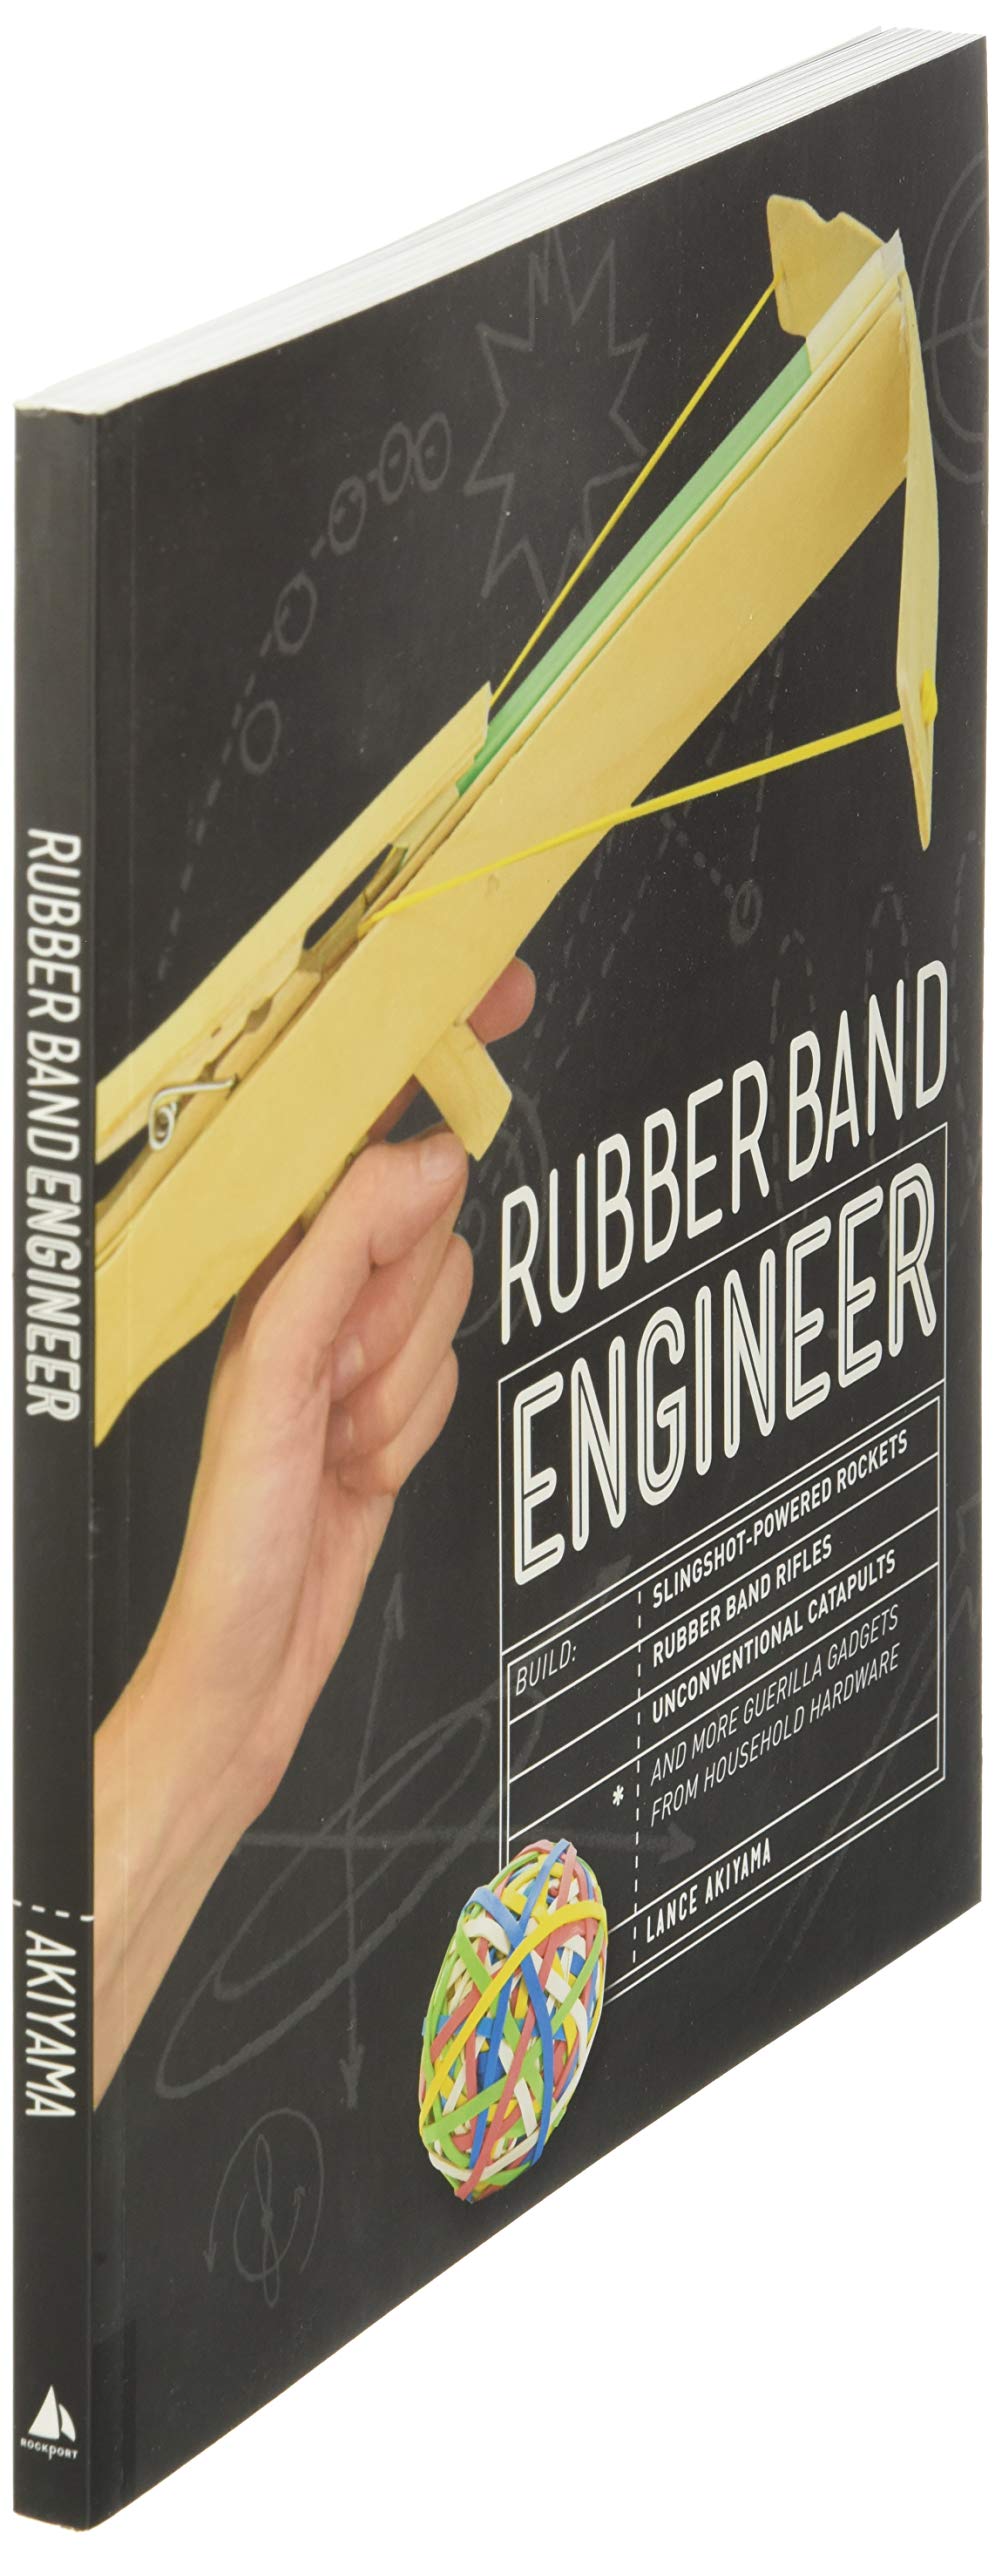 Rubber Band Engineer: Build Slingshot Powered Rockets, Rubber Band Rifles, Unconventional Catapults, and More Guerrilla Gadgets from Household Hardware